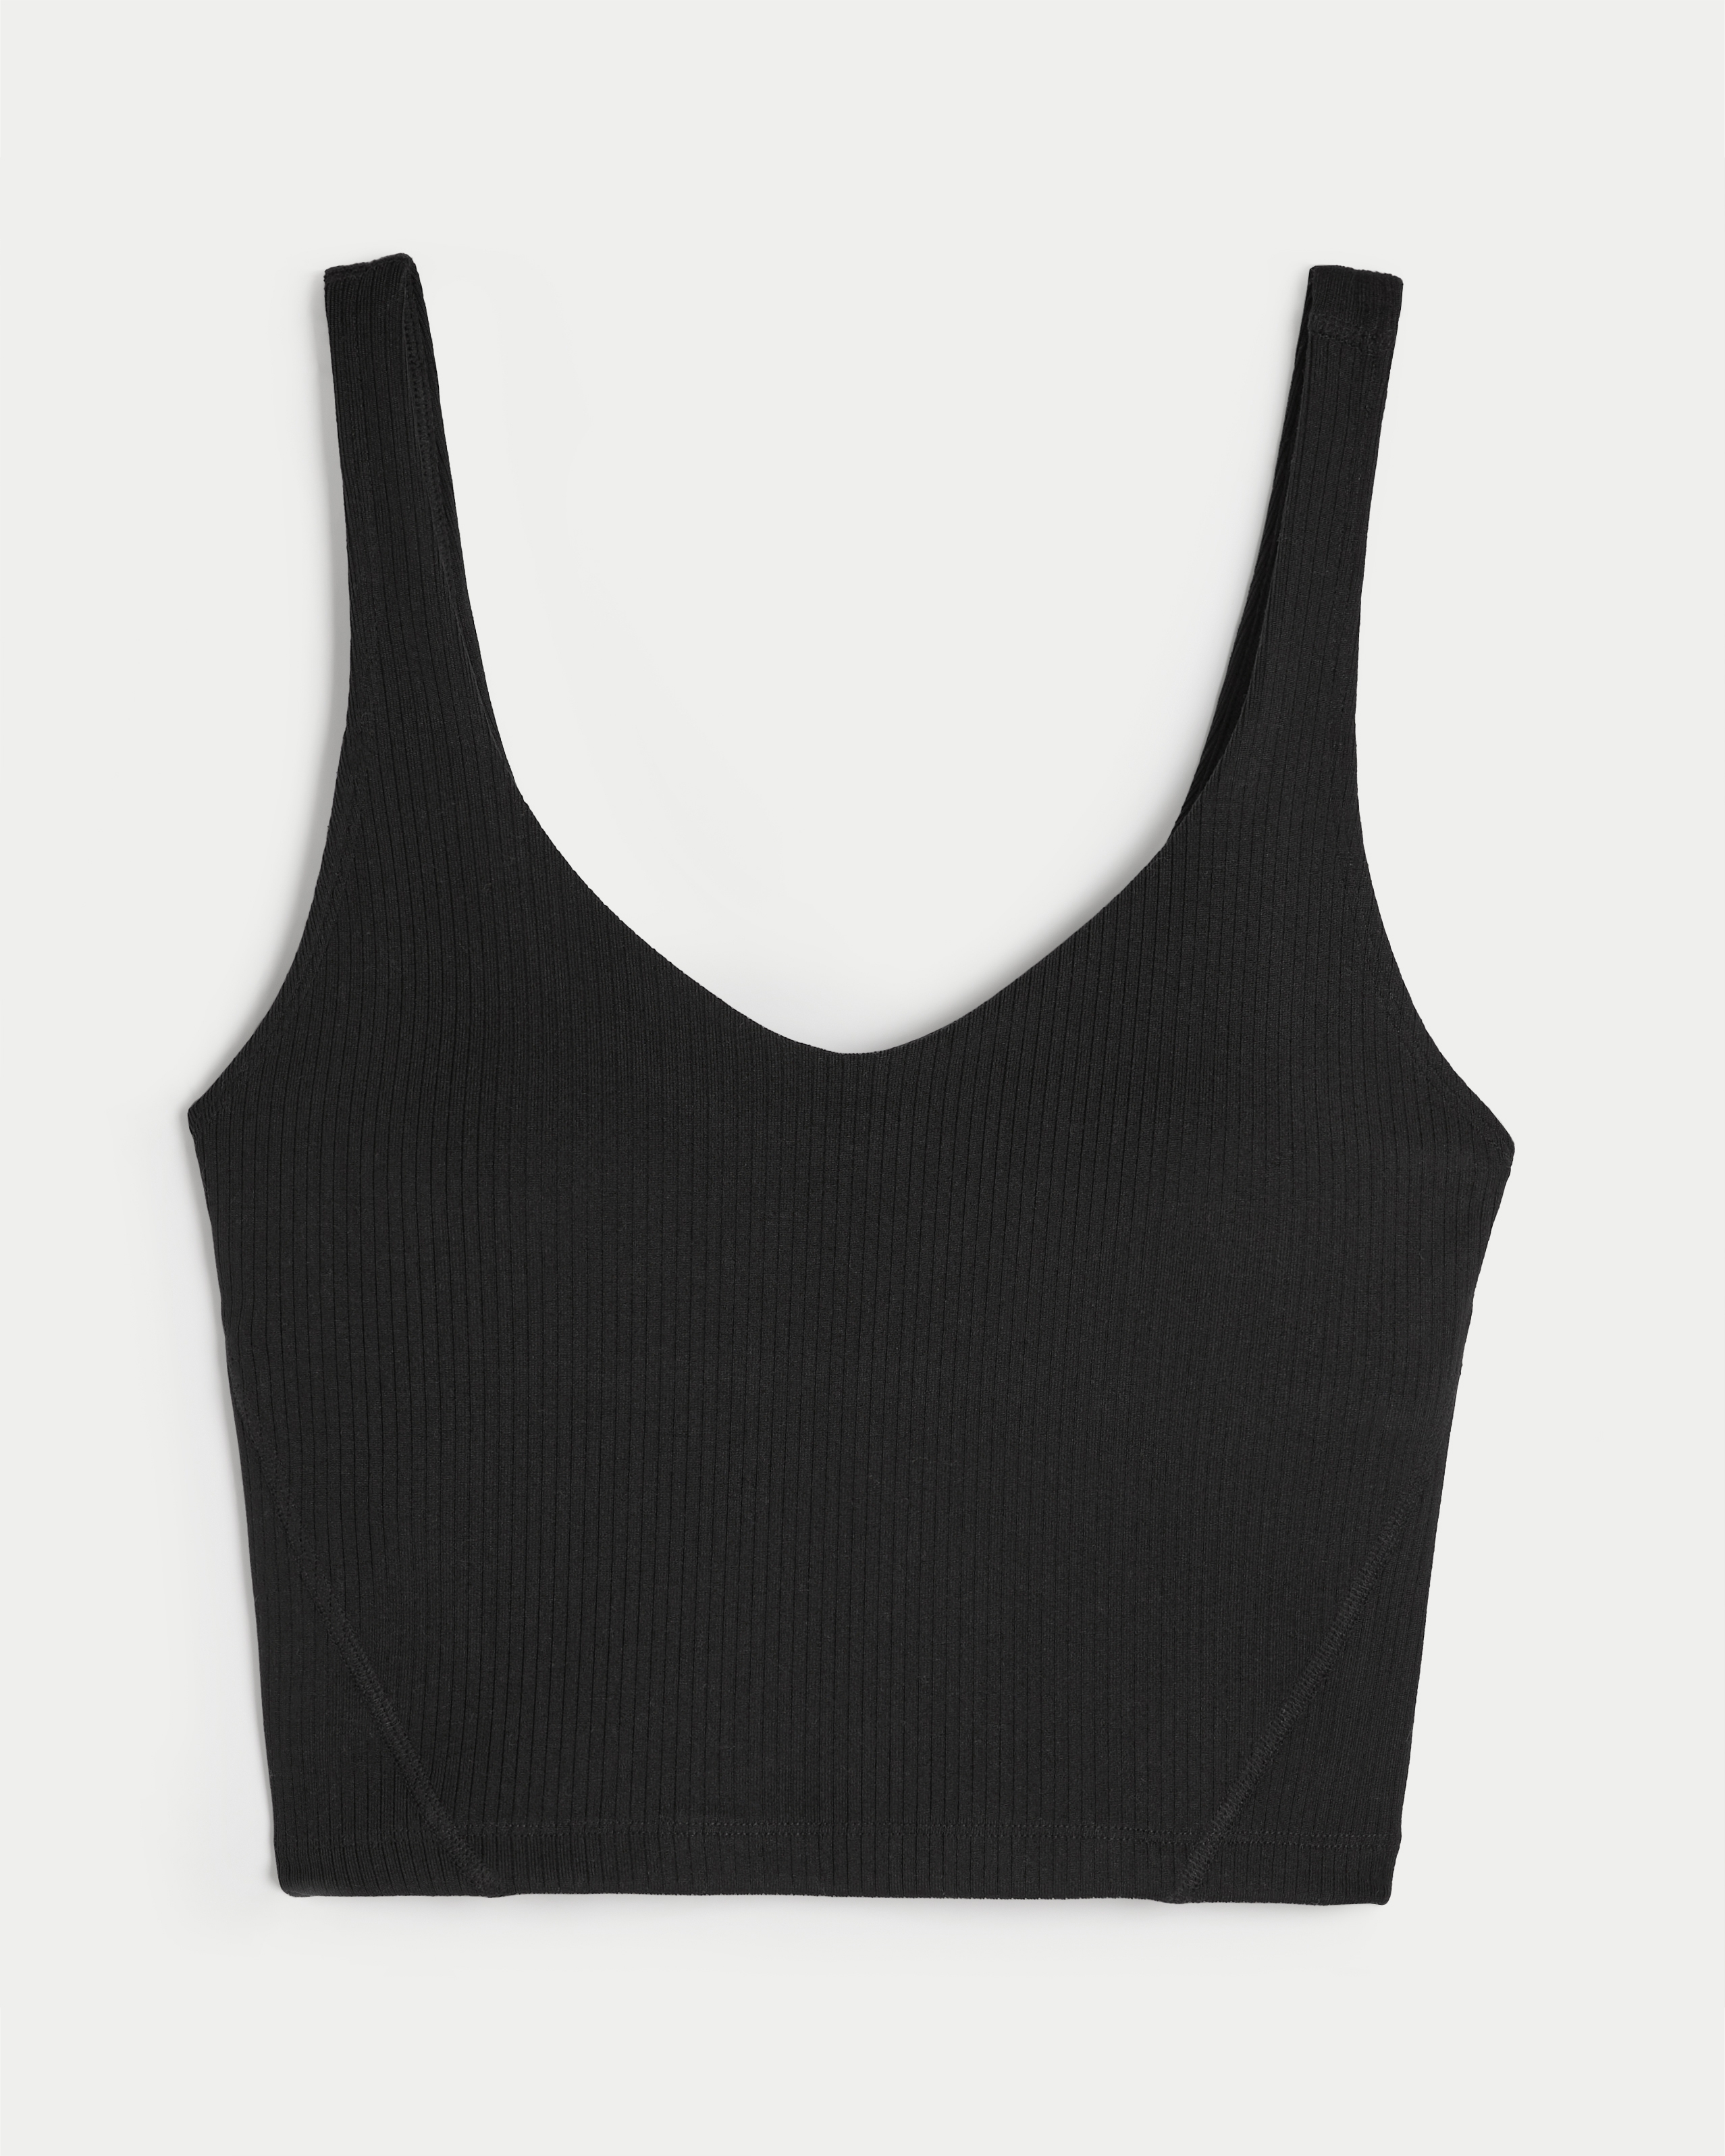 Gilly Hicks Bralette Top Knit Tops for Women